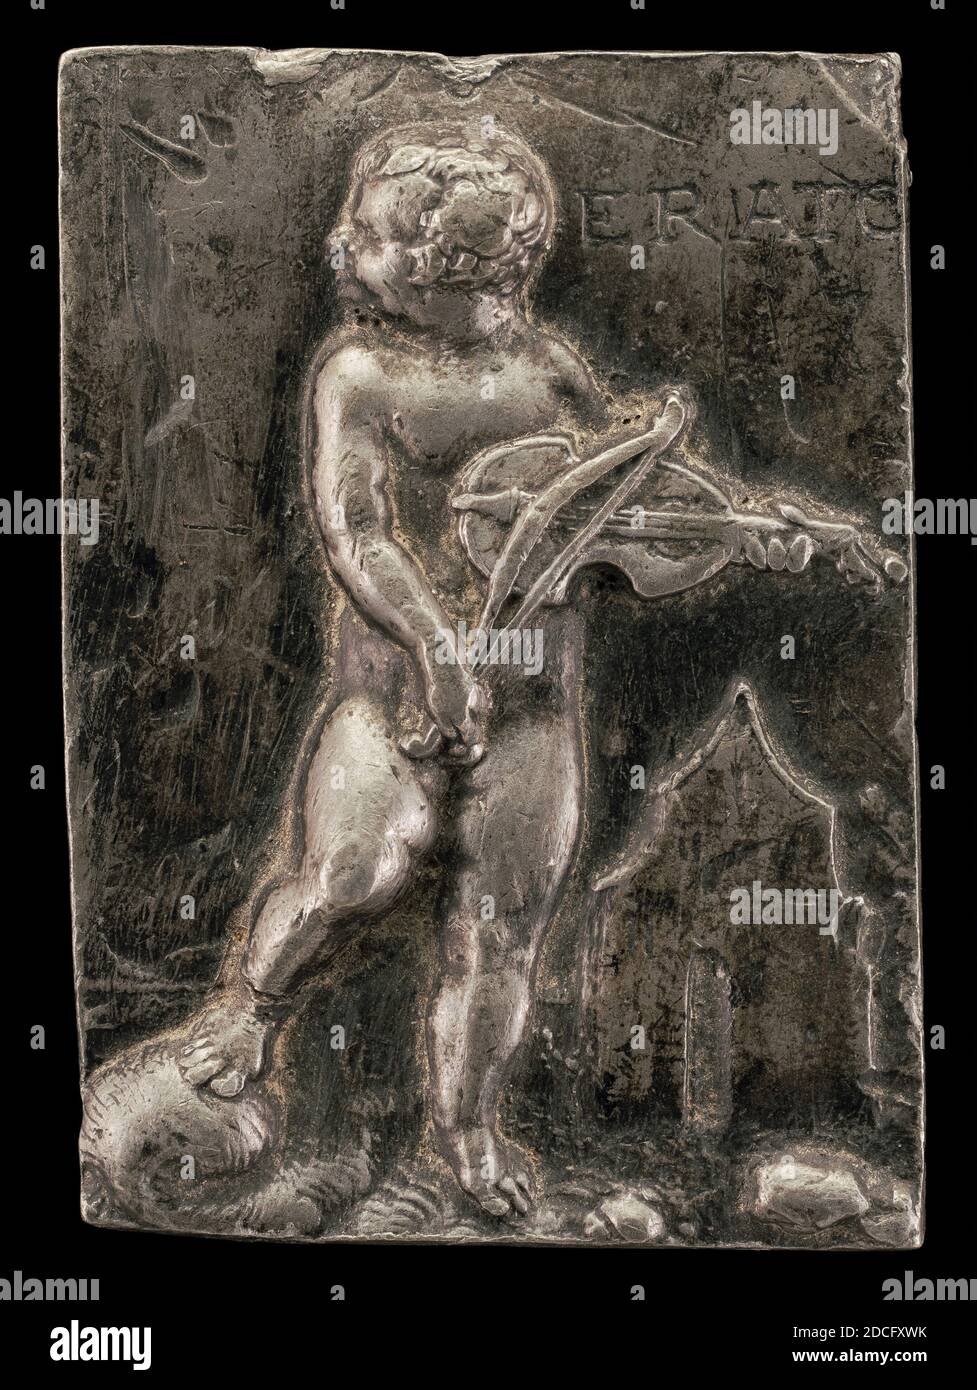 Peter Flötner, (sculptor), German, c. 1485 - 1546, A Putto Symbolizing the Muse Erato, c. 1540, lead, overall: 5.3 x 3.8 cm (2 1/16 x 1 1/2 in Stock Photo